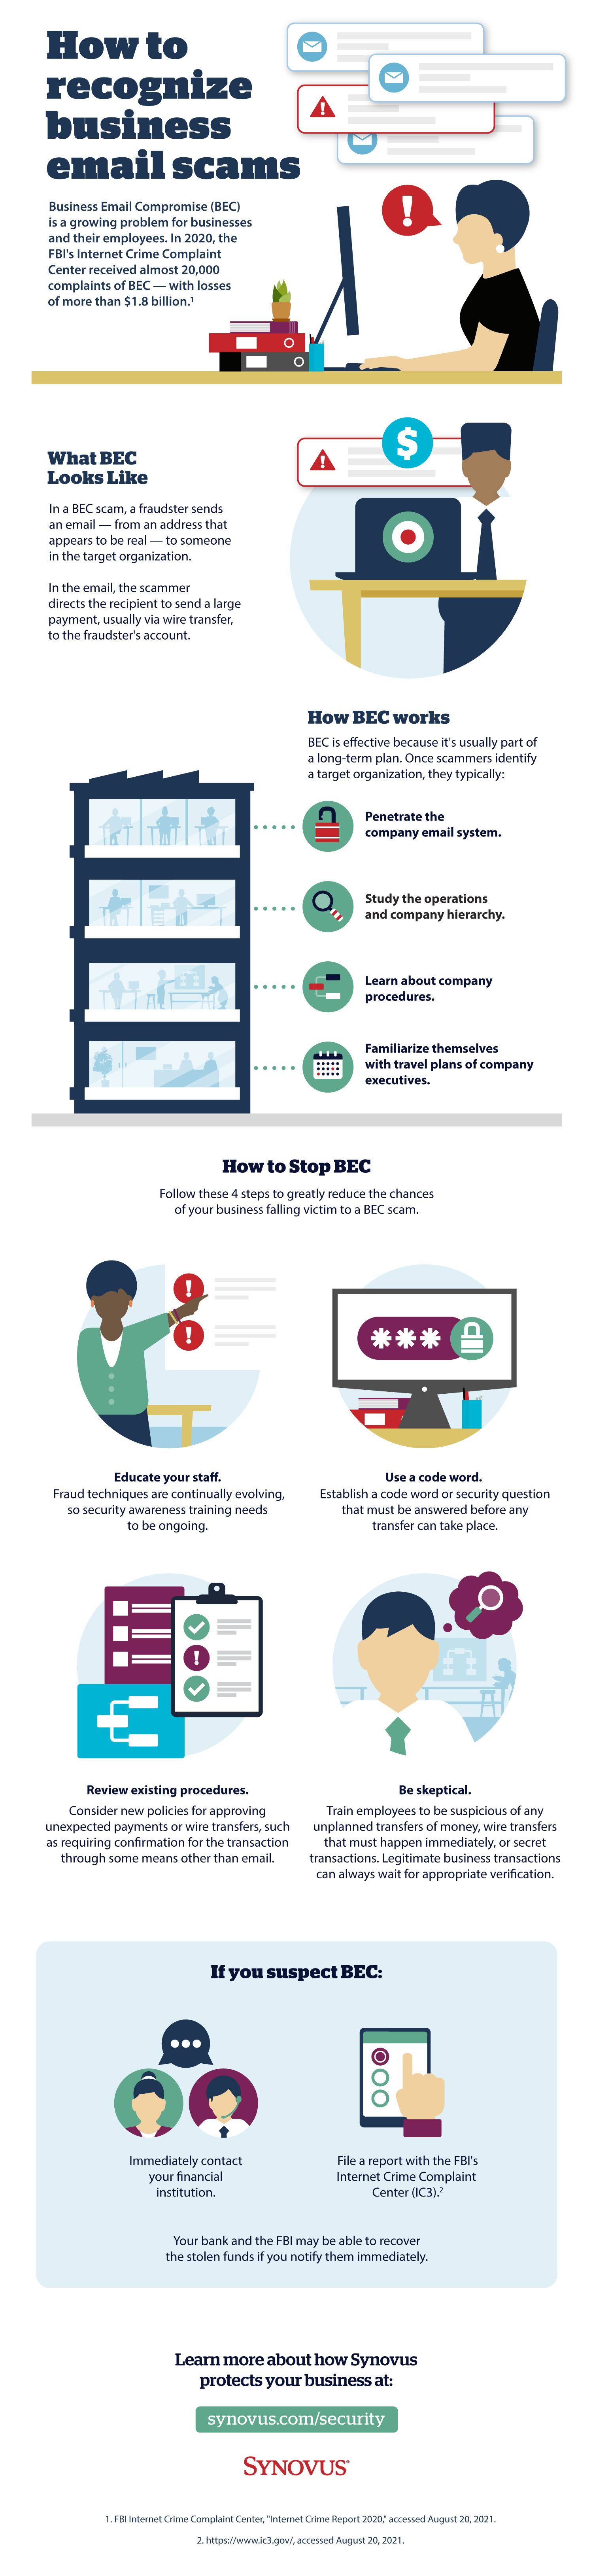 Infographic describing ways to recognize business email scams. A full description is available through a link beneath the image.